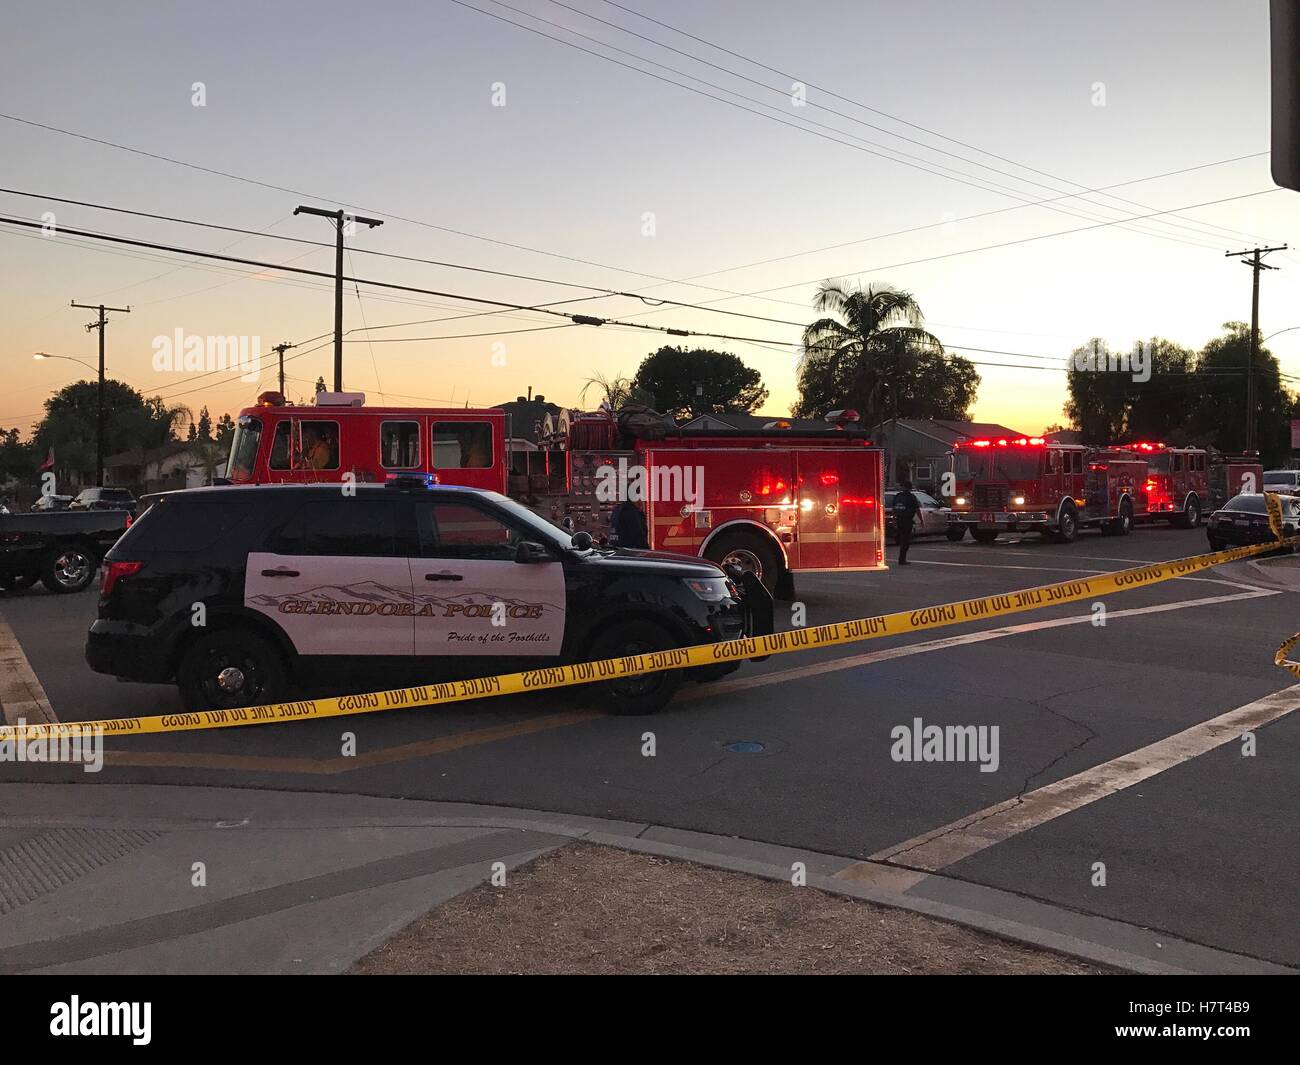 Asuza, USA. 8th Nov, 2016. Police cars and fire trucks gather at the site of shooting near a polling station in Asuza, California, the United States, on Nov. 8, 2016. One person was killed and two others were critically injured in the shooting incident outside a polling location in Asuza, police said. Credit:  Huang Chao/Xinhua/Alamy Live News Stock Photo